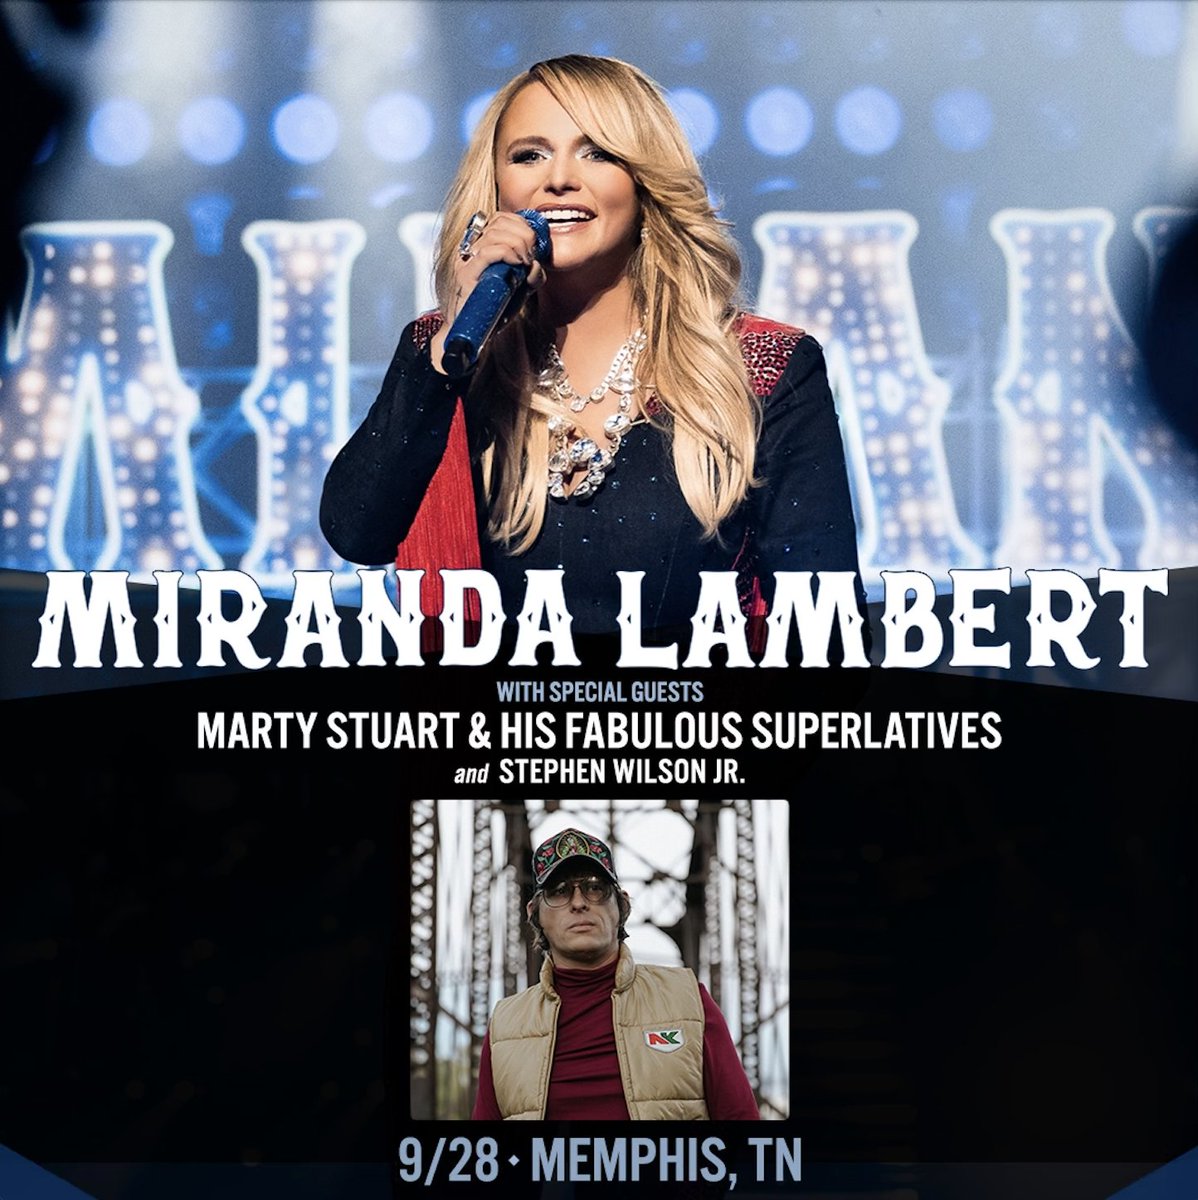 Memphis - see you in late september. get to share a stage w/ heroes: @mirandalambert @martystuarthq life is crazy. thanks having us, ML. ❤️ Tickets: stephenwilsonjr.com